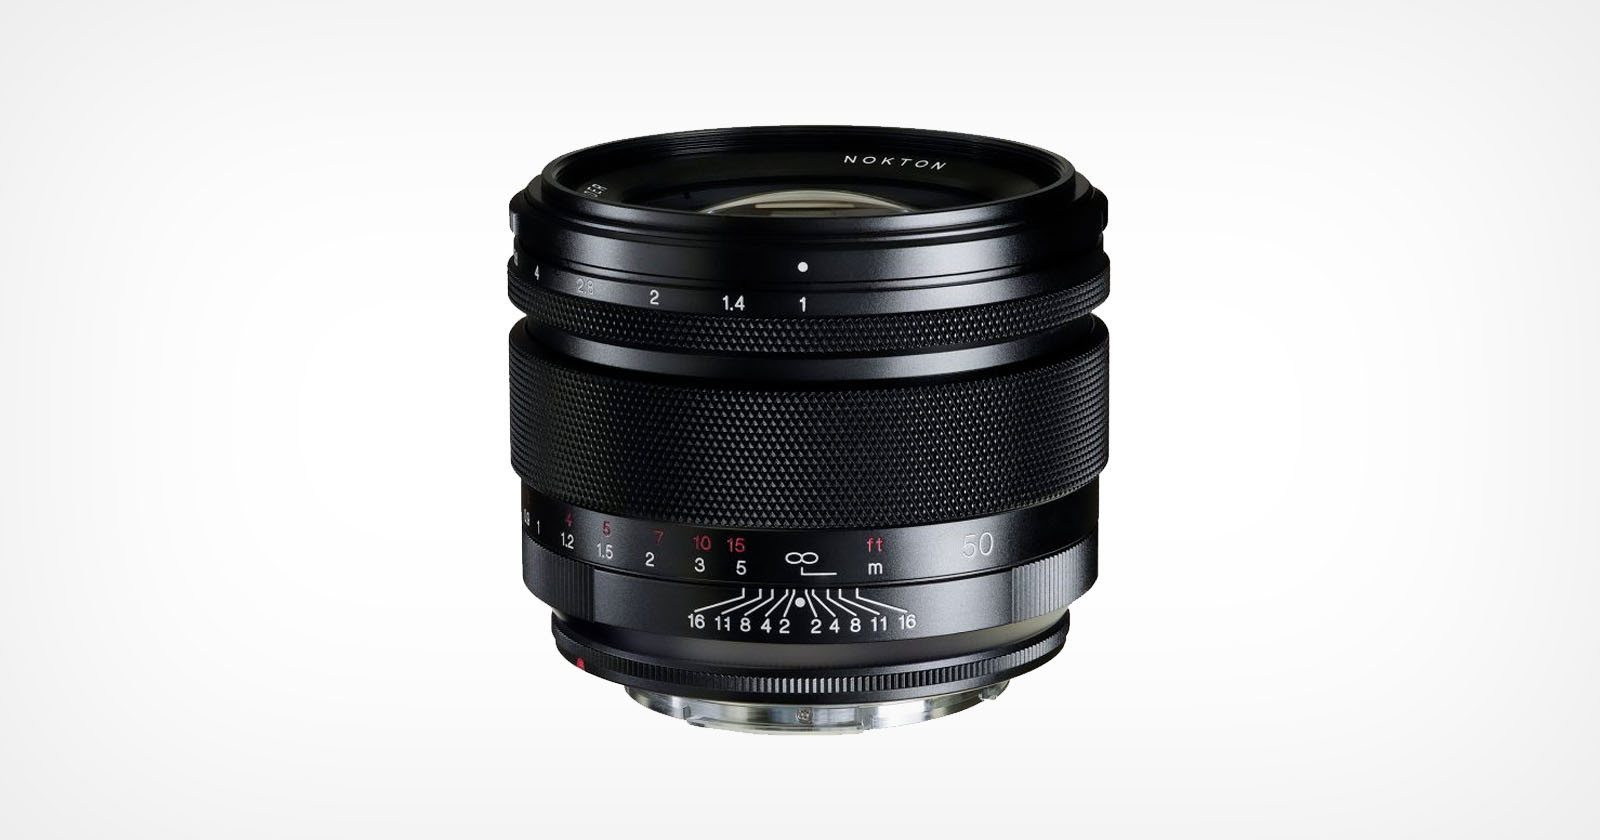  cosina making its first canon rf-mount lens 